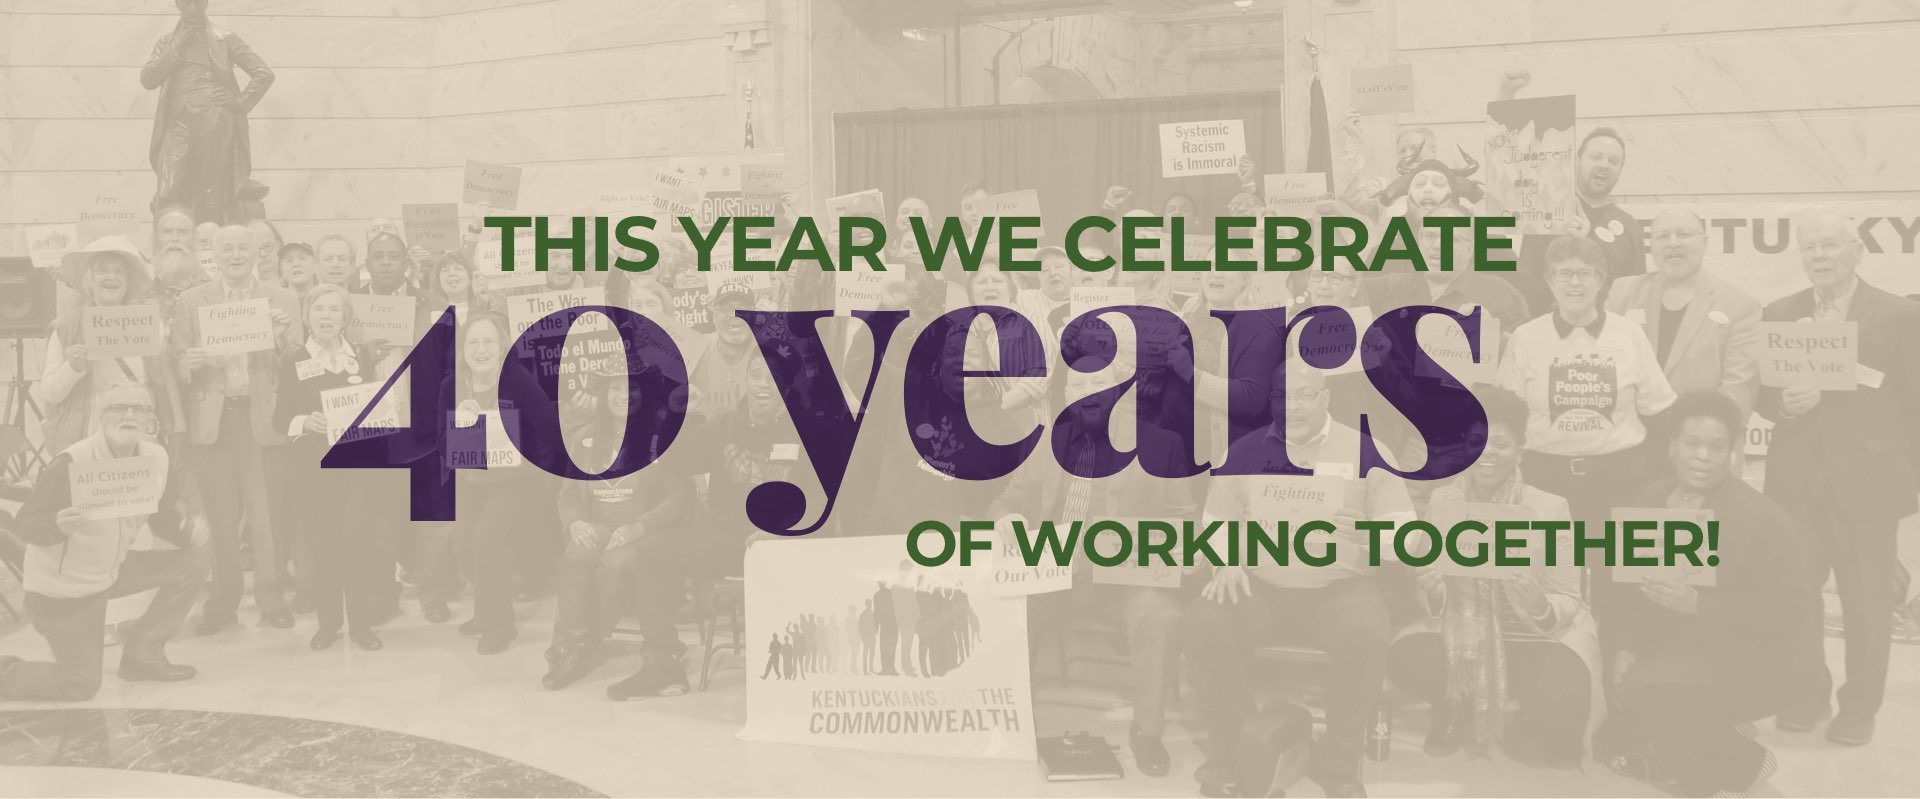 This year we celebrate 40 years of working together!